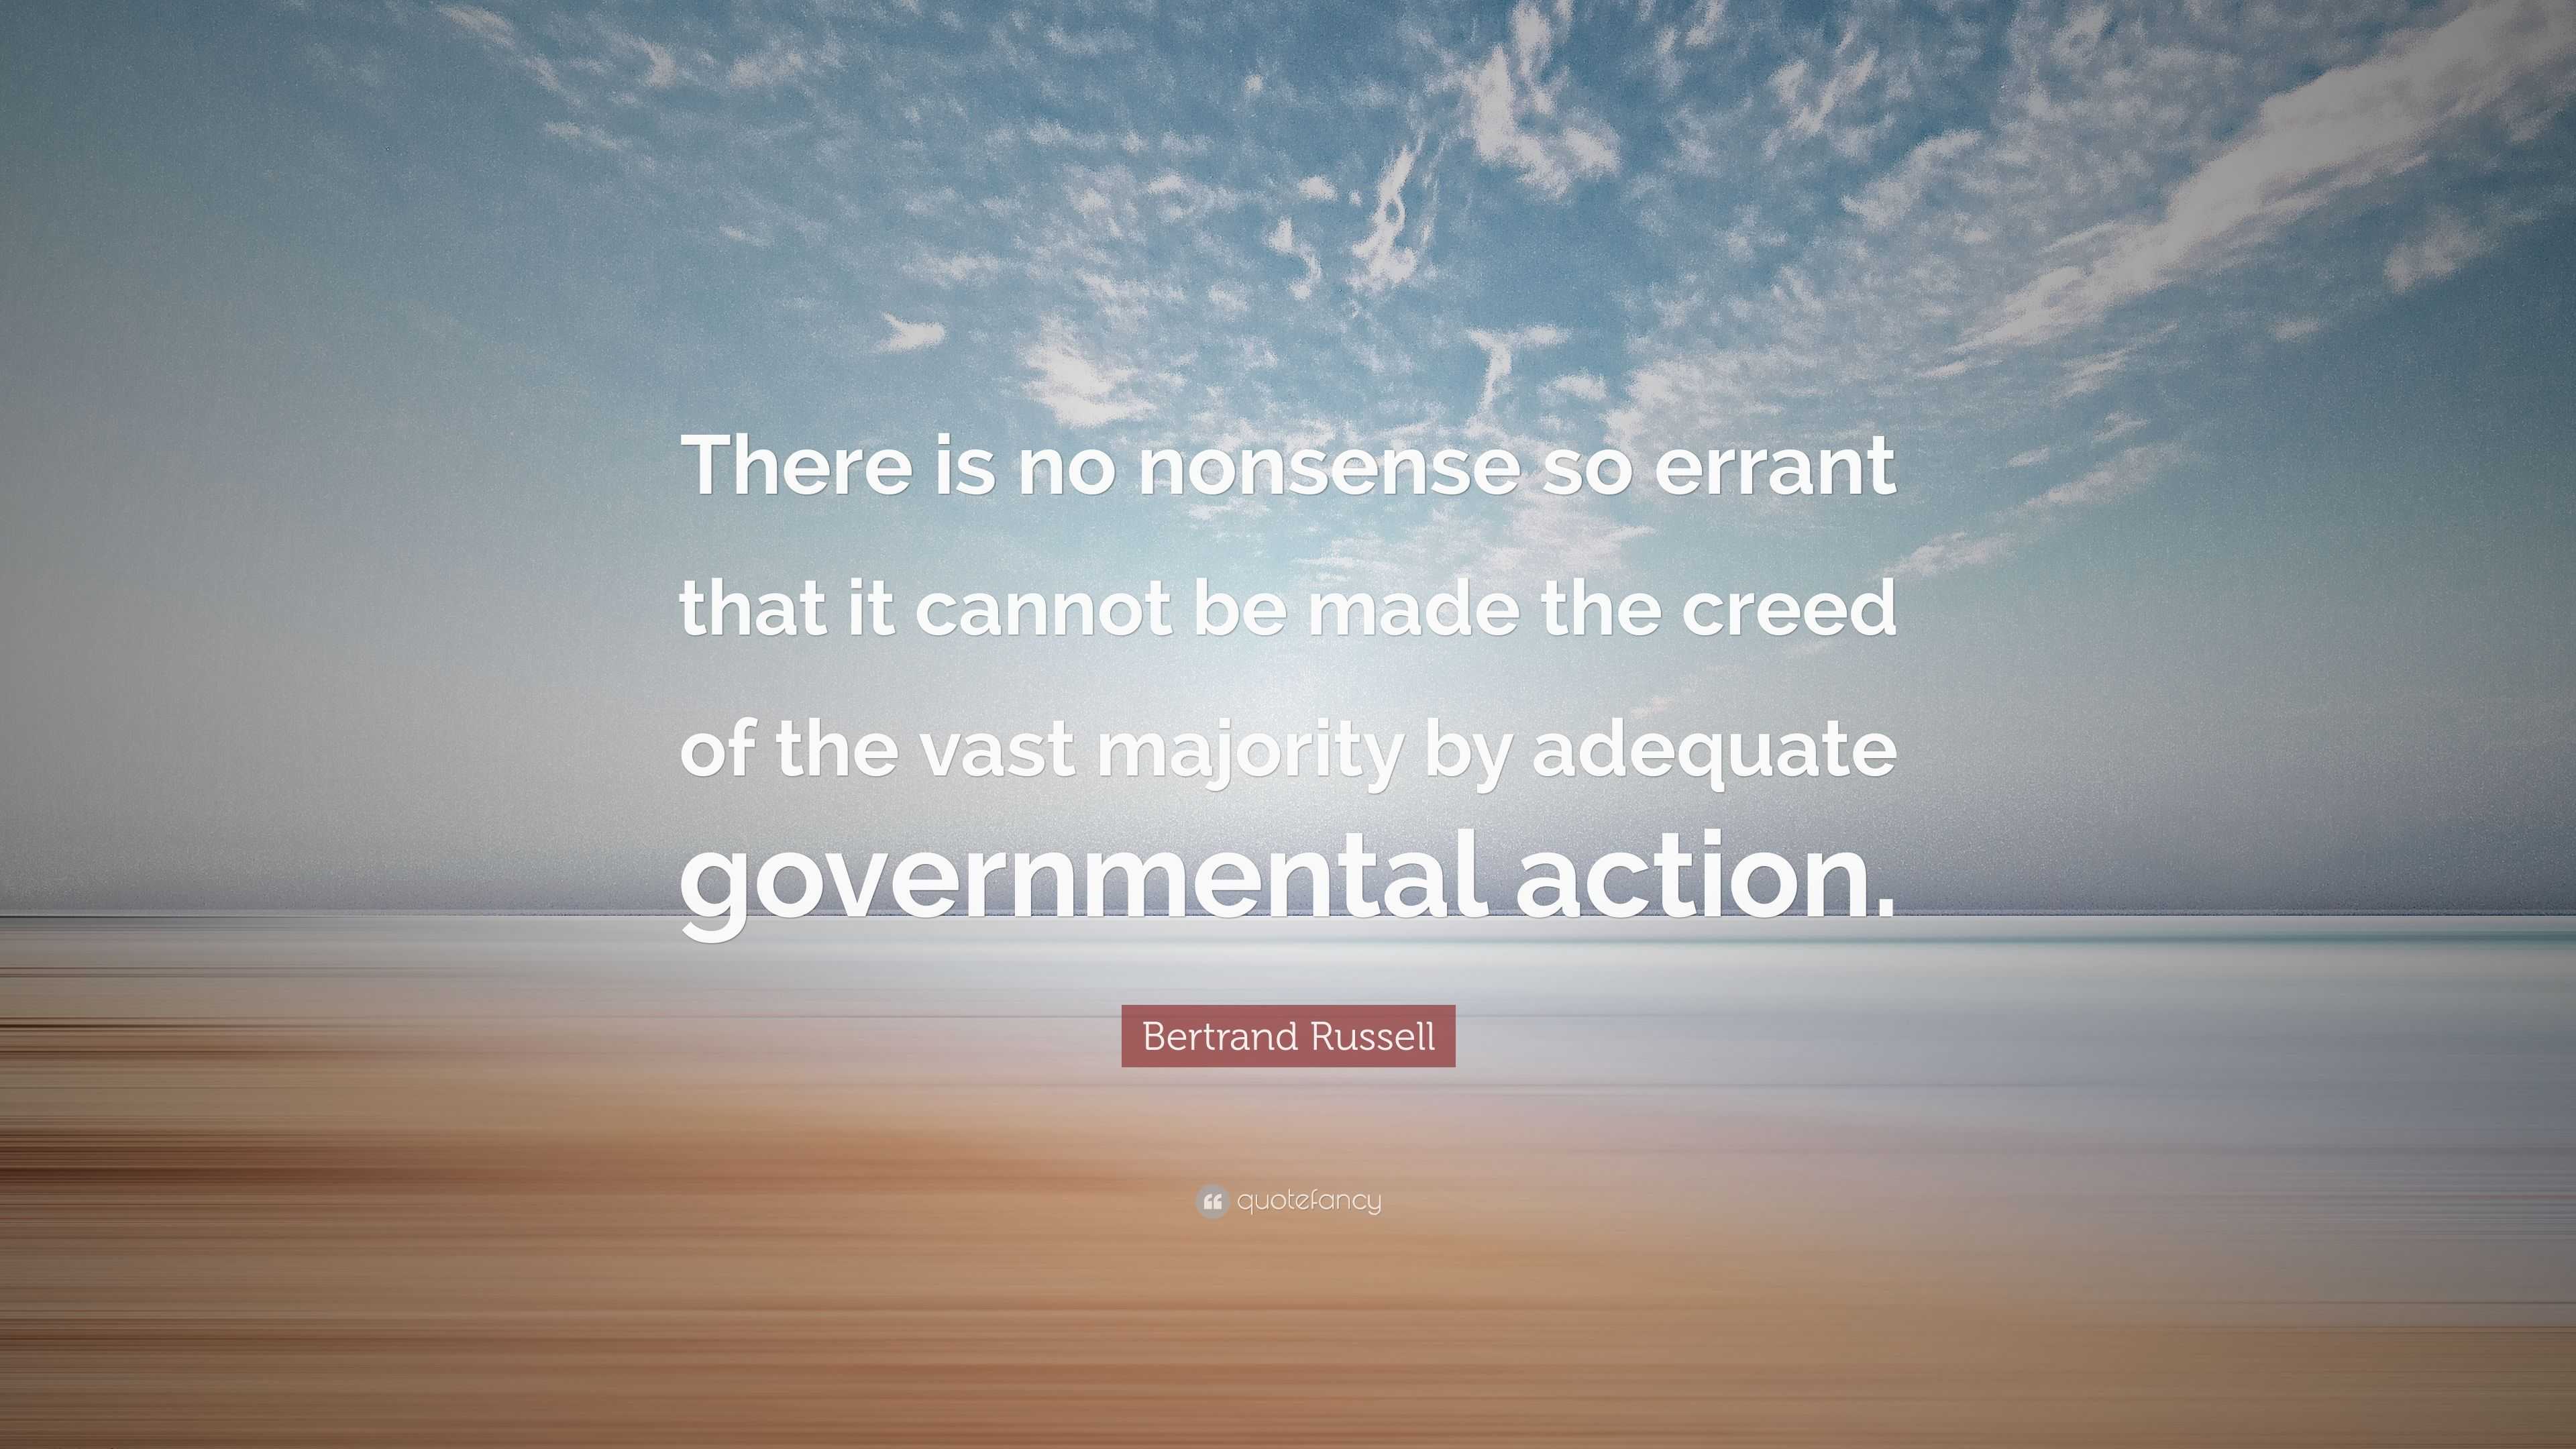 Bertrand Russell Quote: “There is no nonsense so errant that it